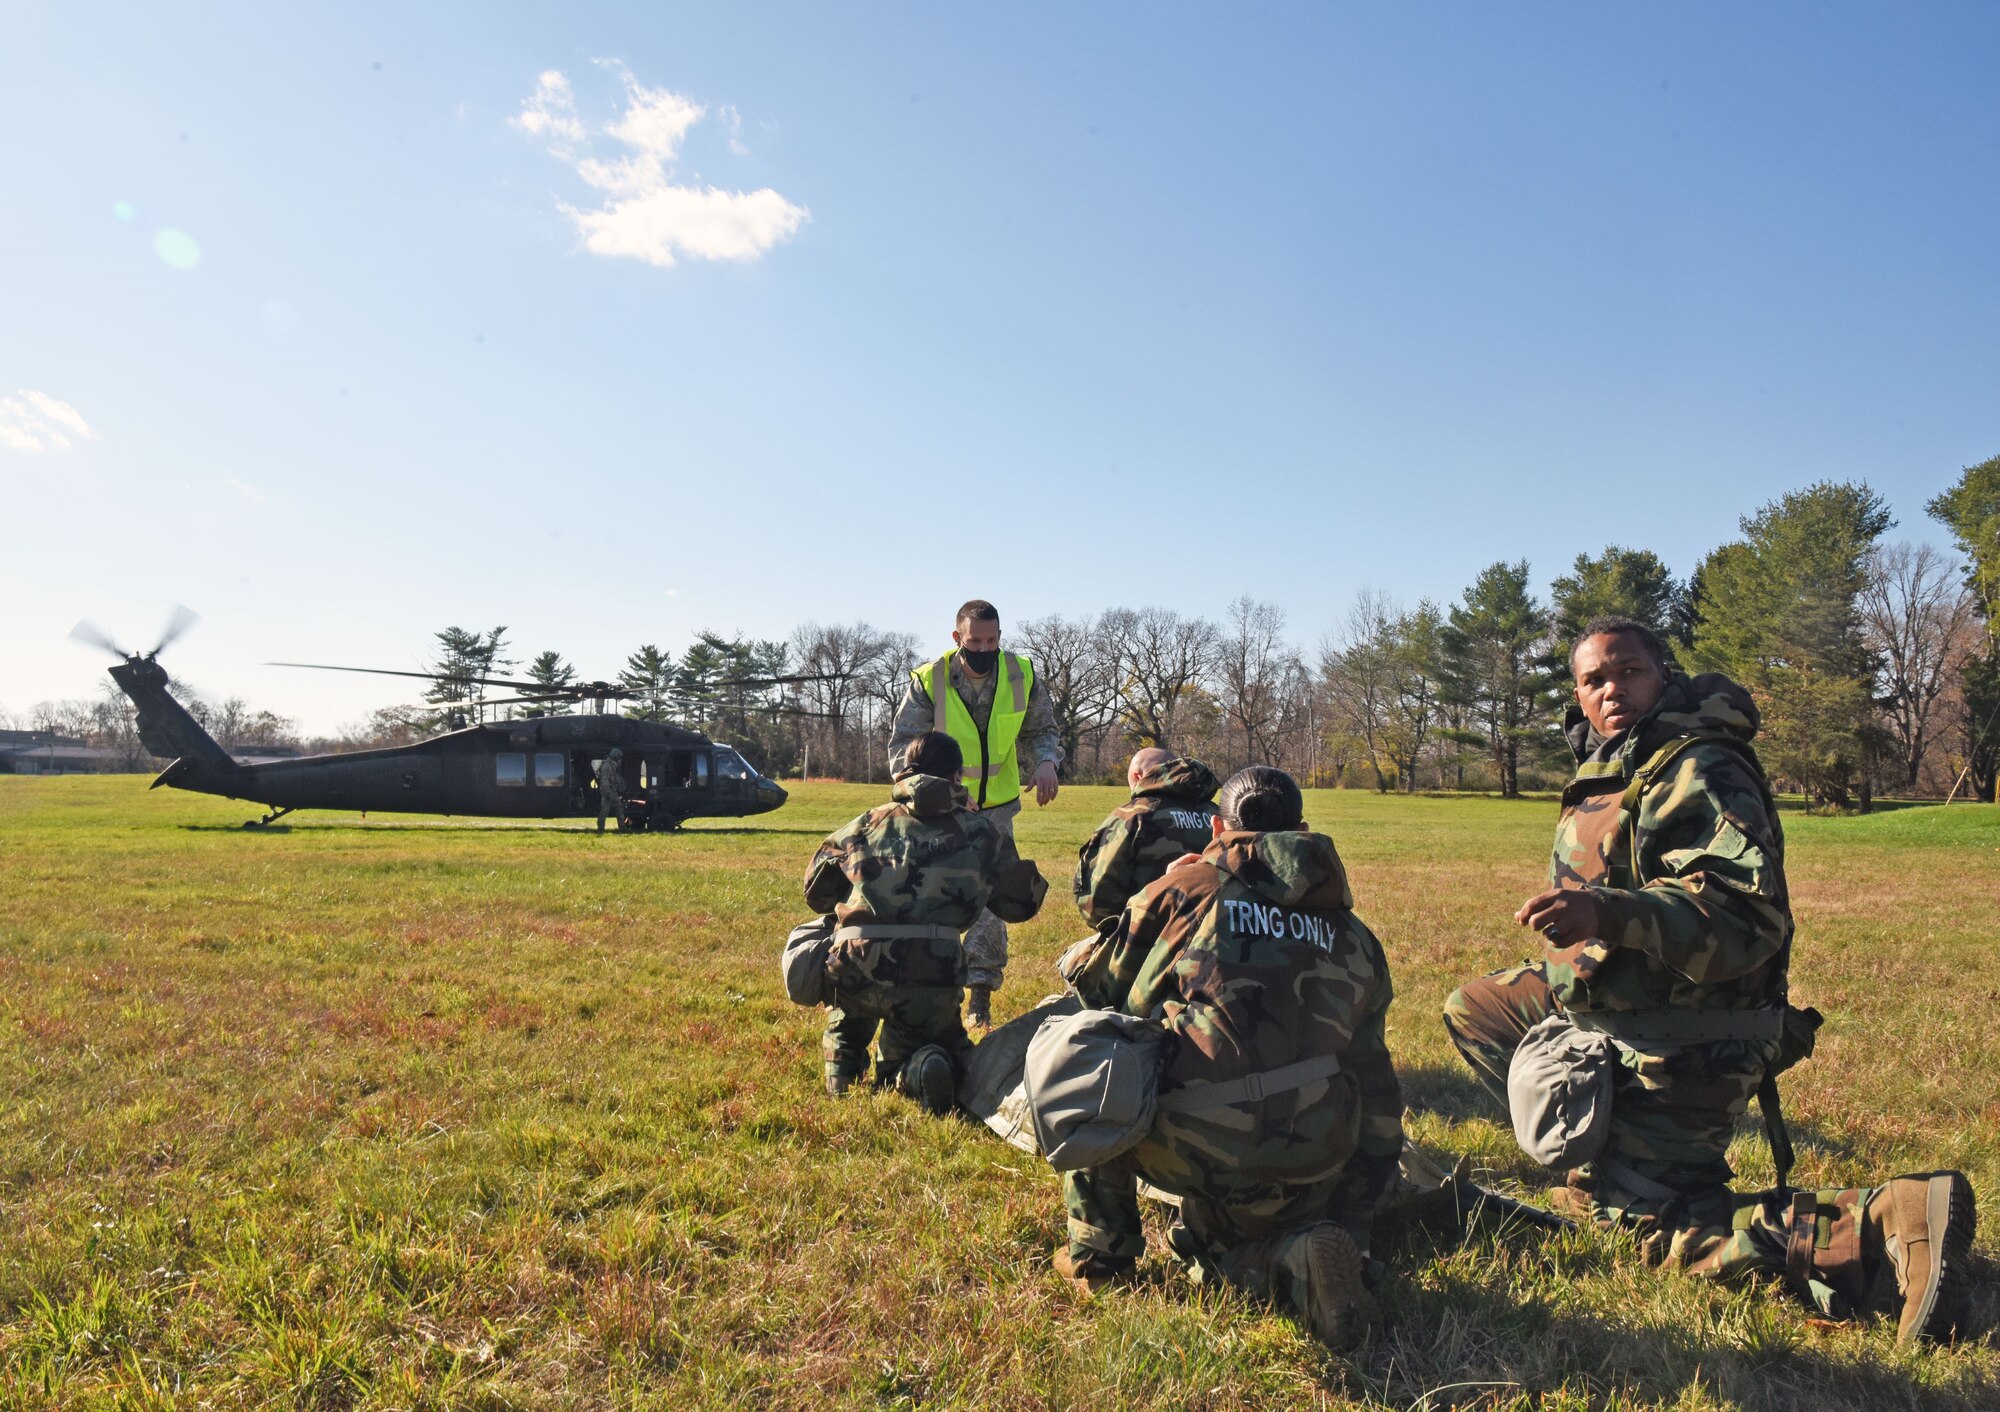 U.S. Air Force Lt. Col. Joshua Swantek, 108th Medical Group wing inspection team leader, prepares participants for their first MEDEVAC tactical combat casualty care mock casualty training at the Babe Ruth Field, Nov. 16, 2020 at Joint Base McGuire-Dix-Lakehurst, N.J. This training helps military personnel on how to transport patients in and out of moving vehicles. (U.S. Air Force photo by Daniel Barney)